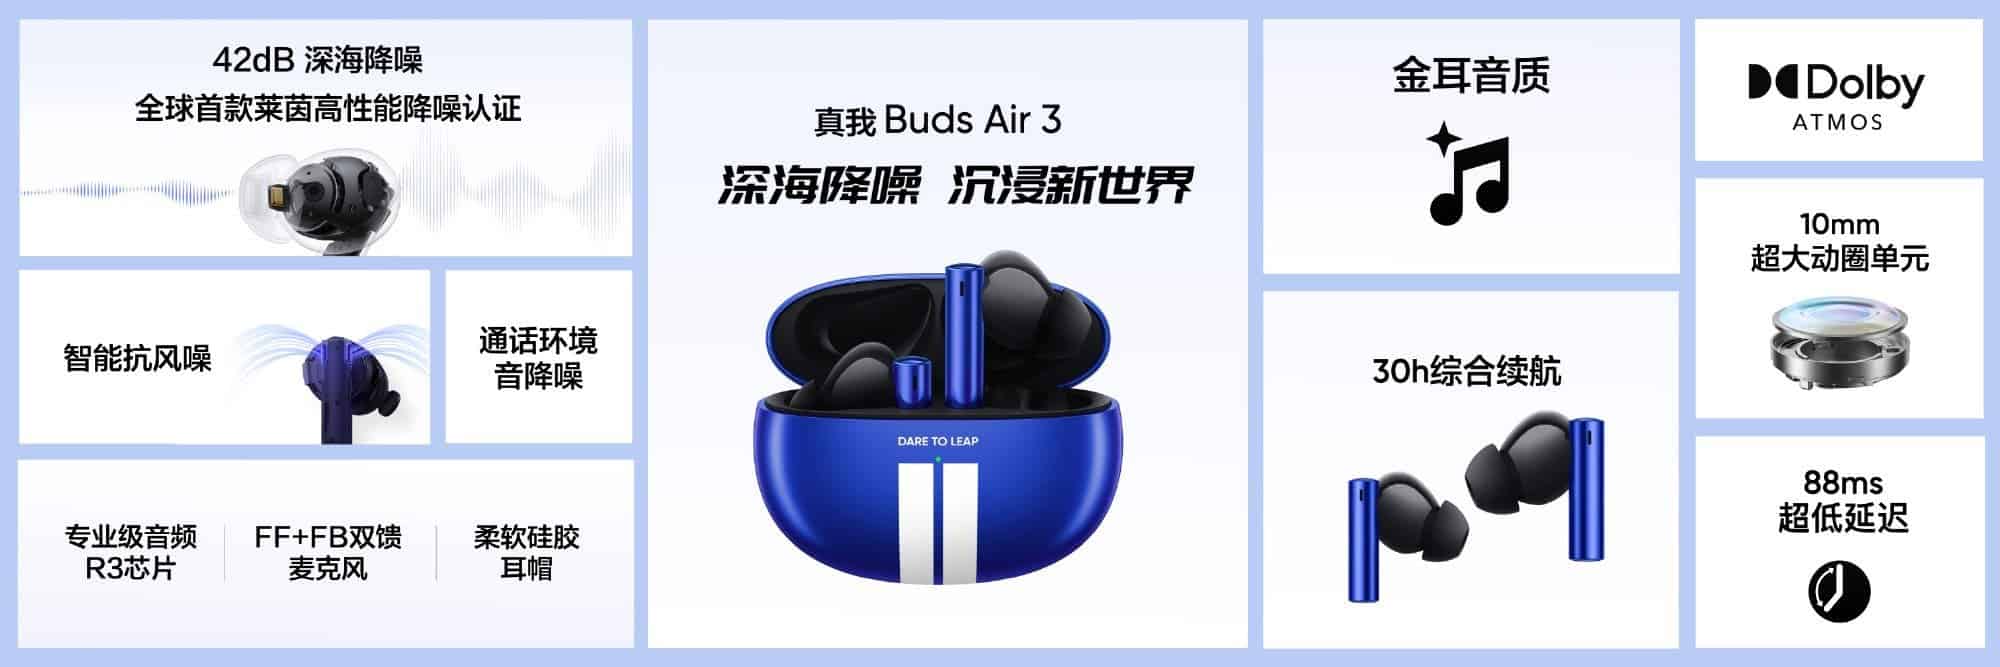 Realme Buds Air3 features